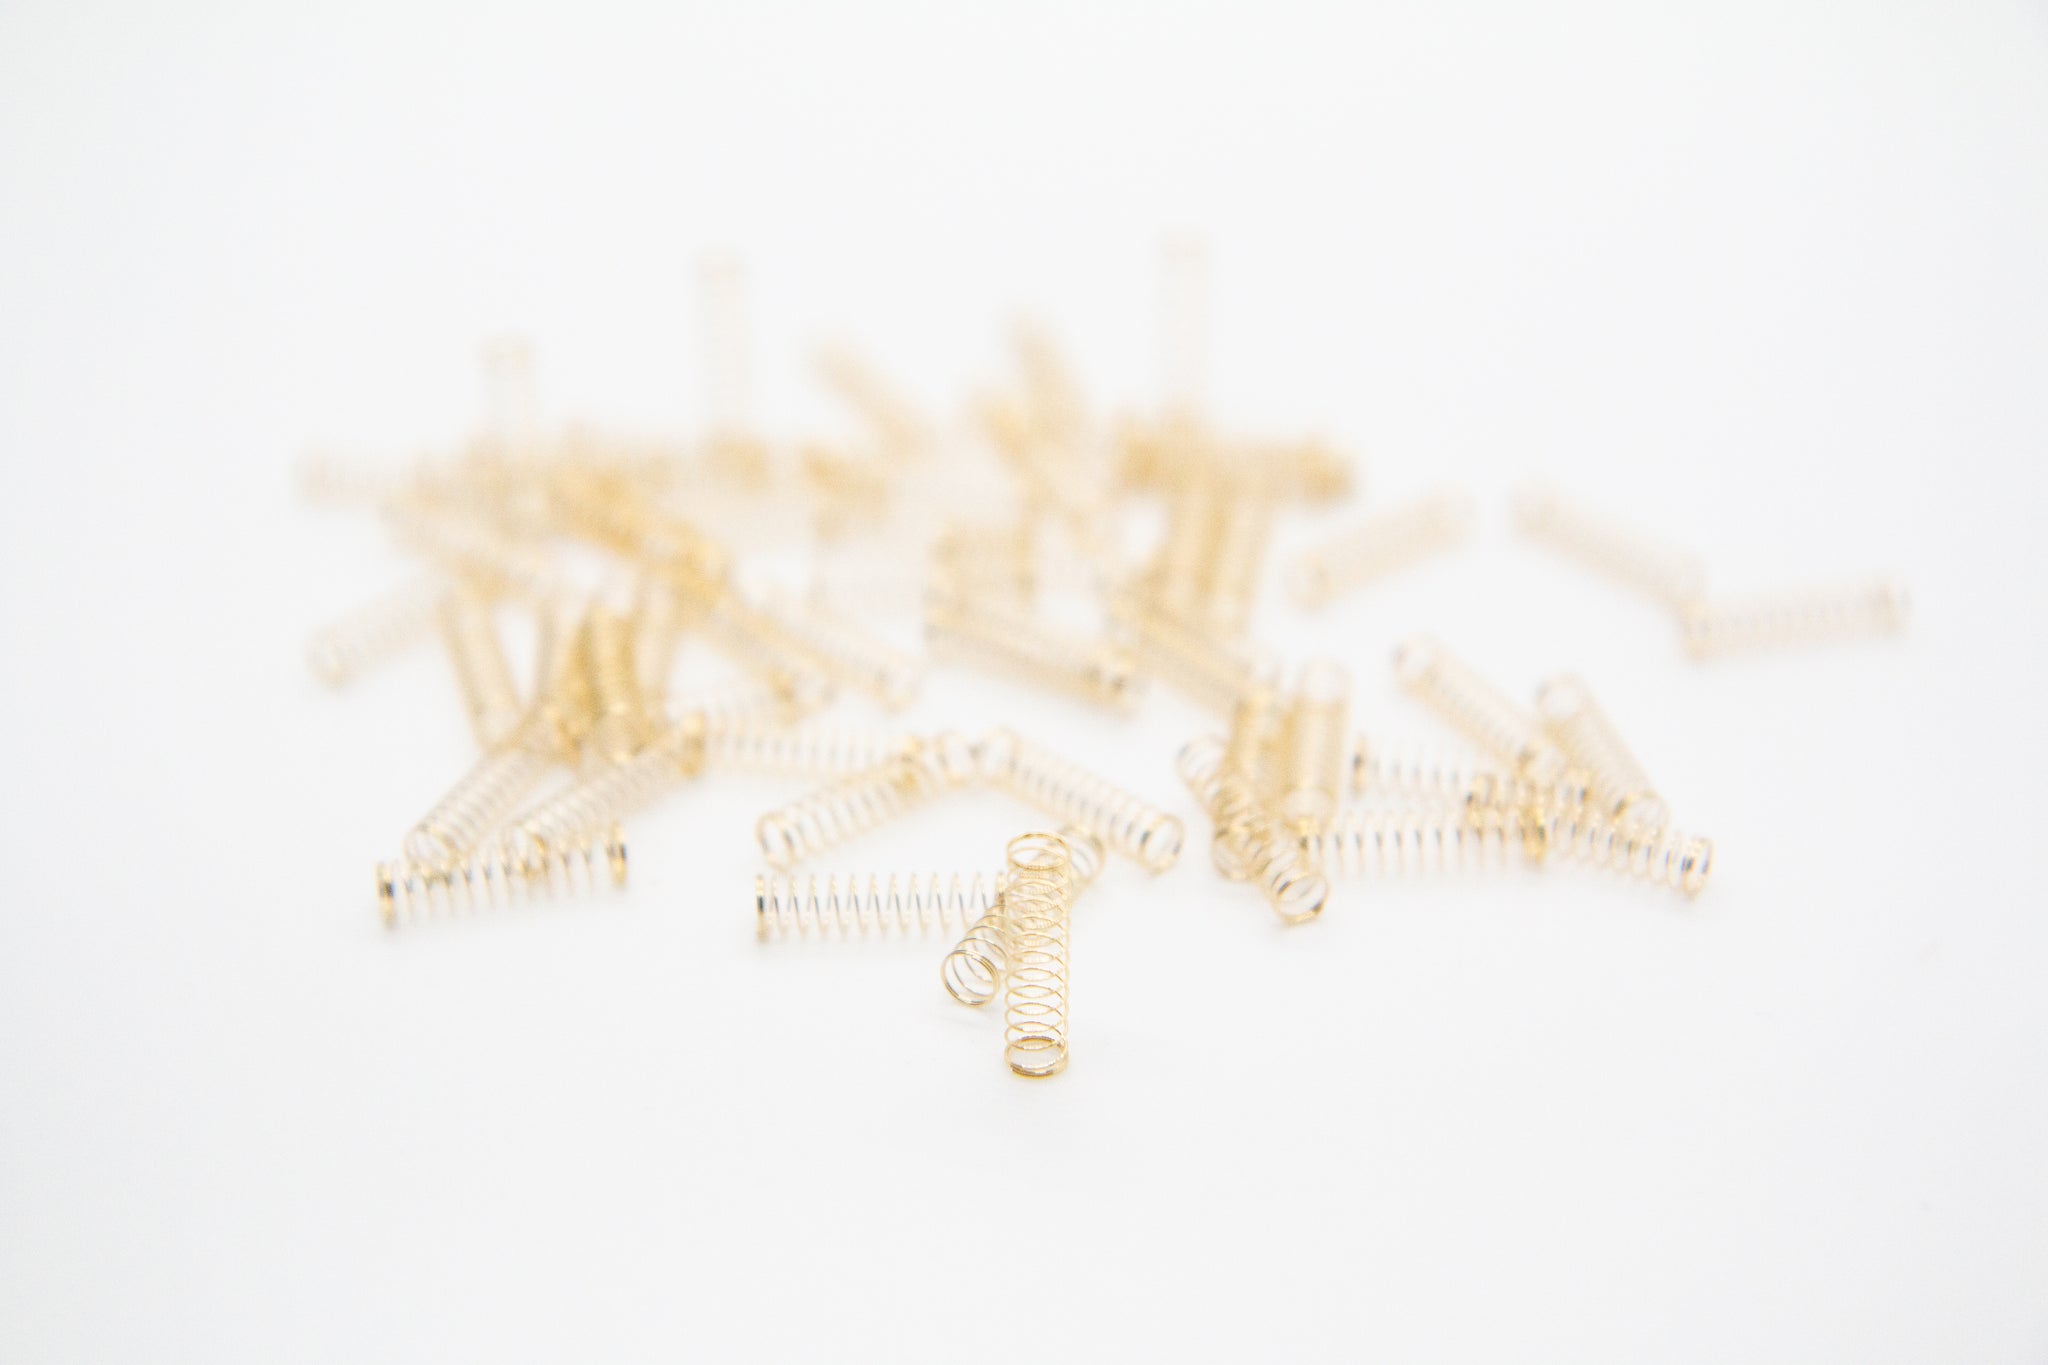 Durock Gold Plated Springs - 65g